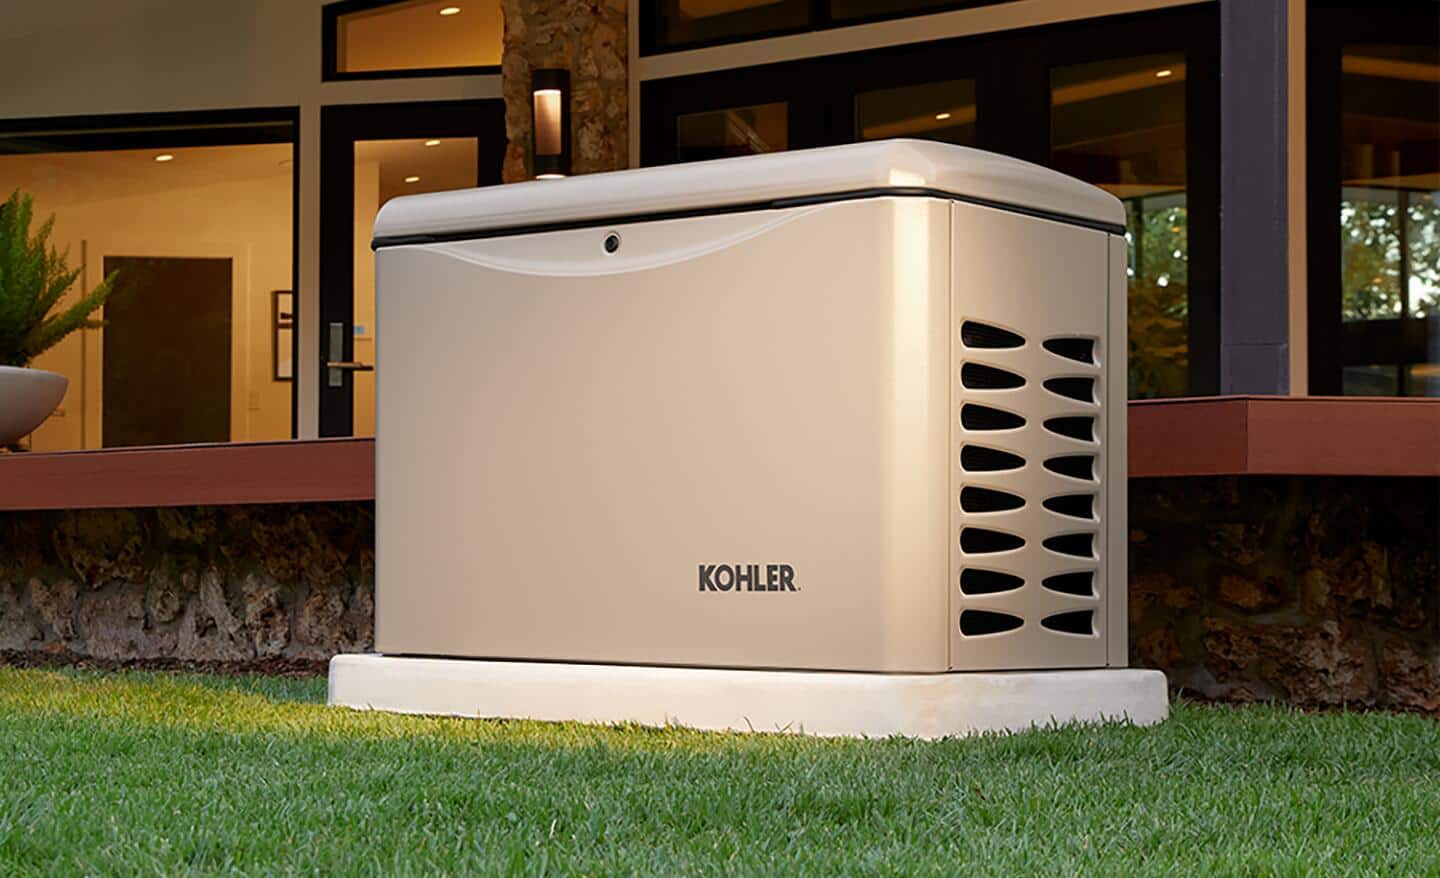 A standby generator to power a house placed next to a home.